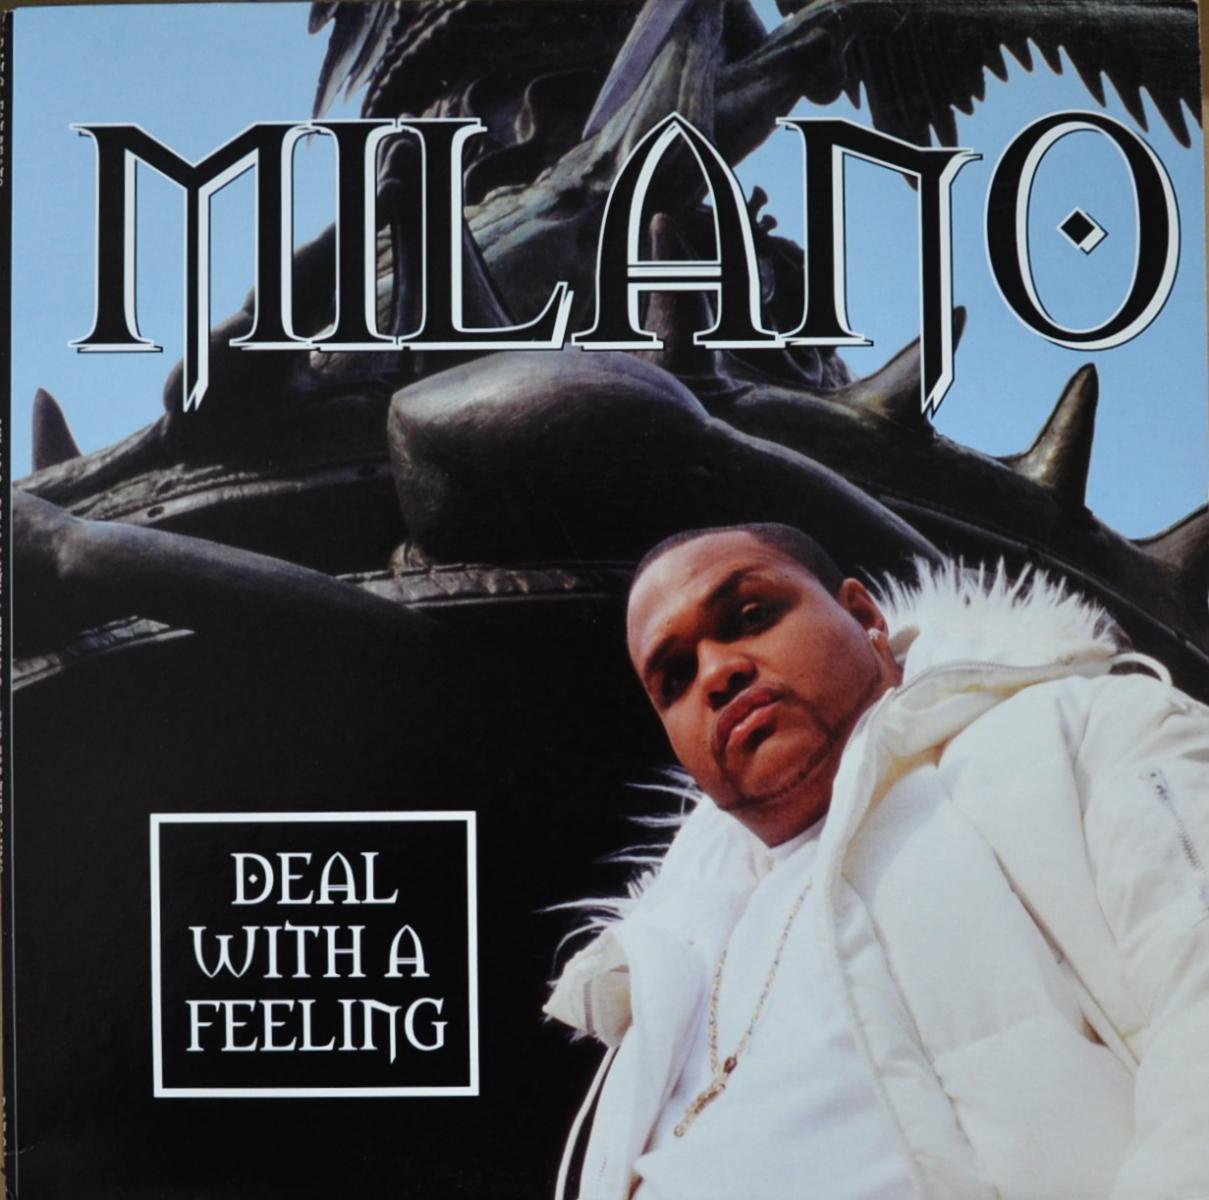 MILANO / DEAL WITH A FEELING (PROD BY SHOW) / REP FOR THE SLUMS (PROD BY AHMED) (12